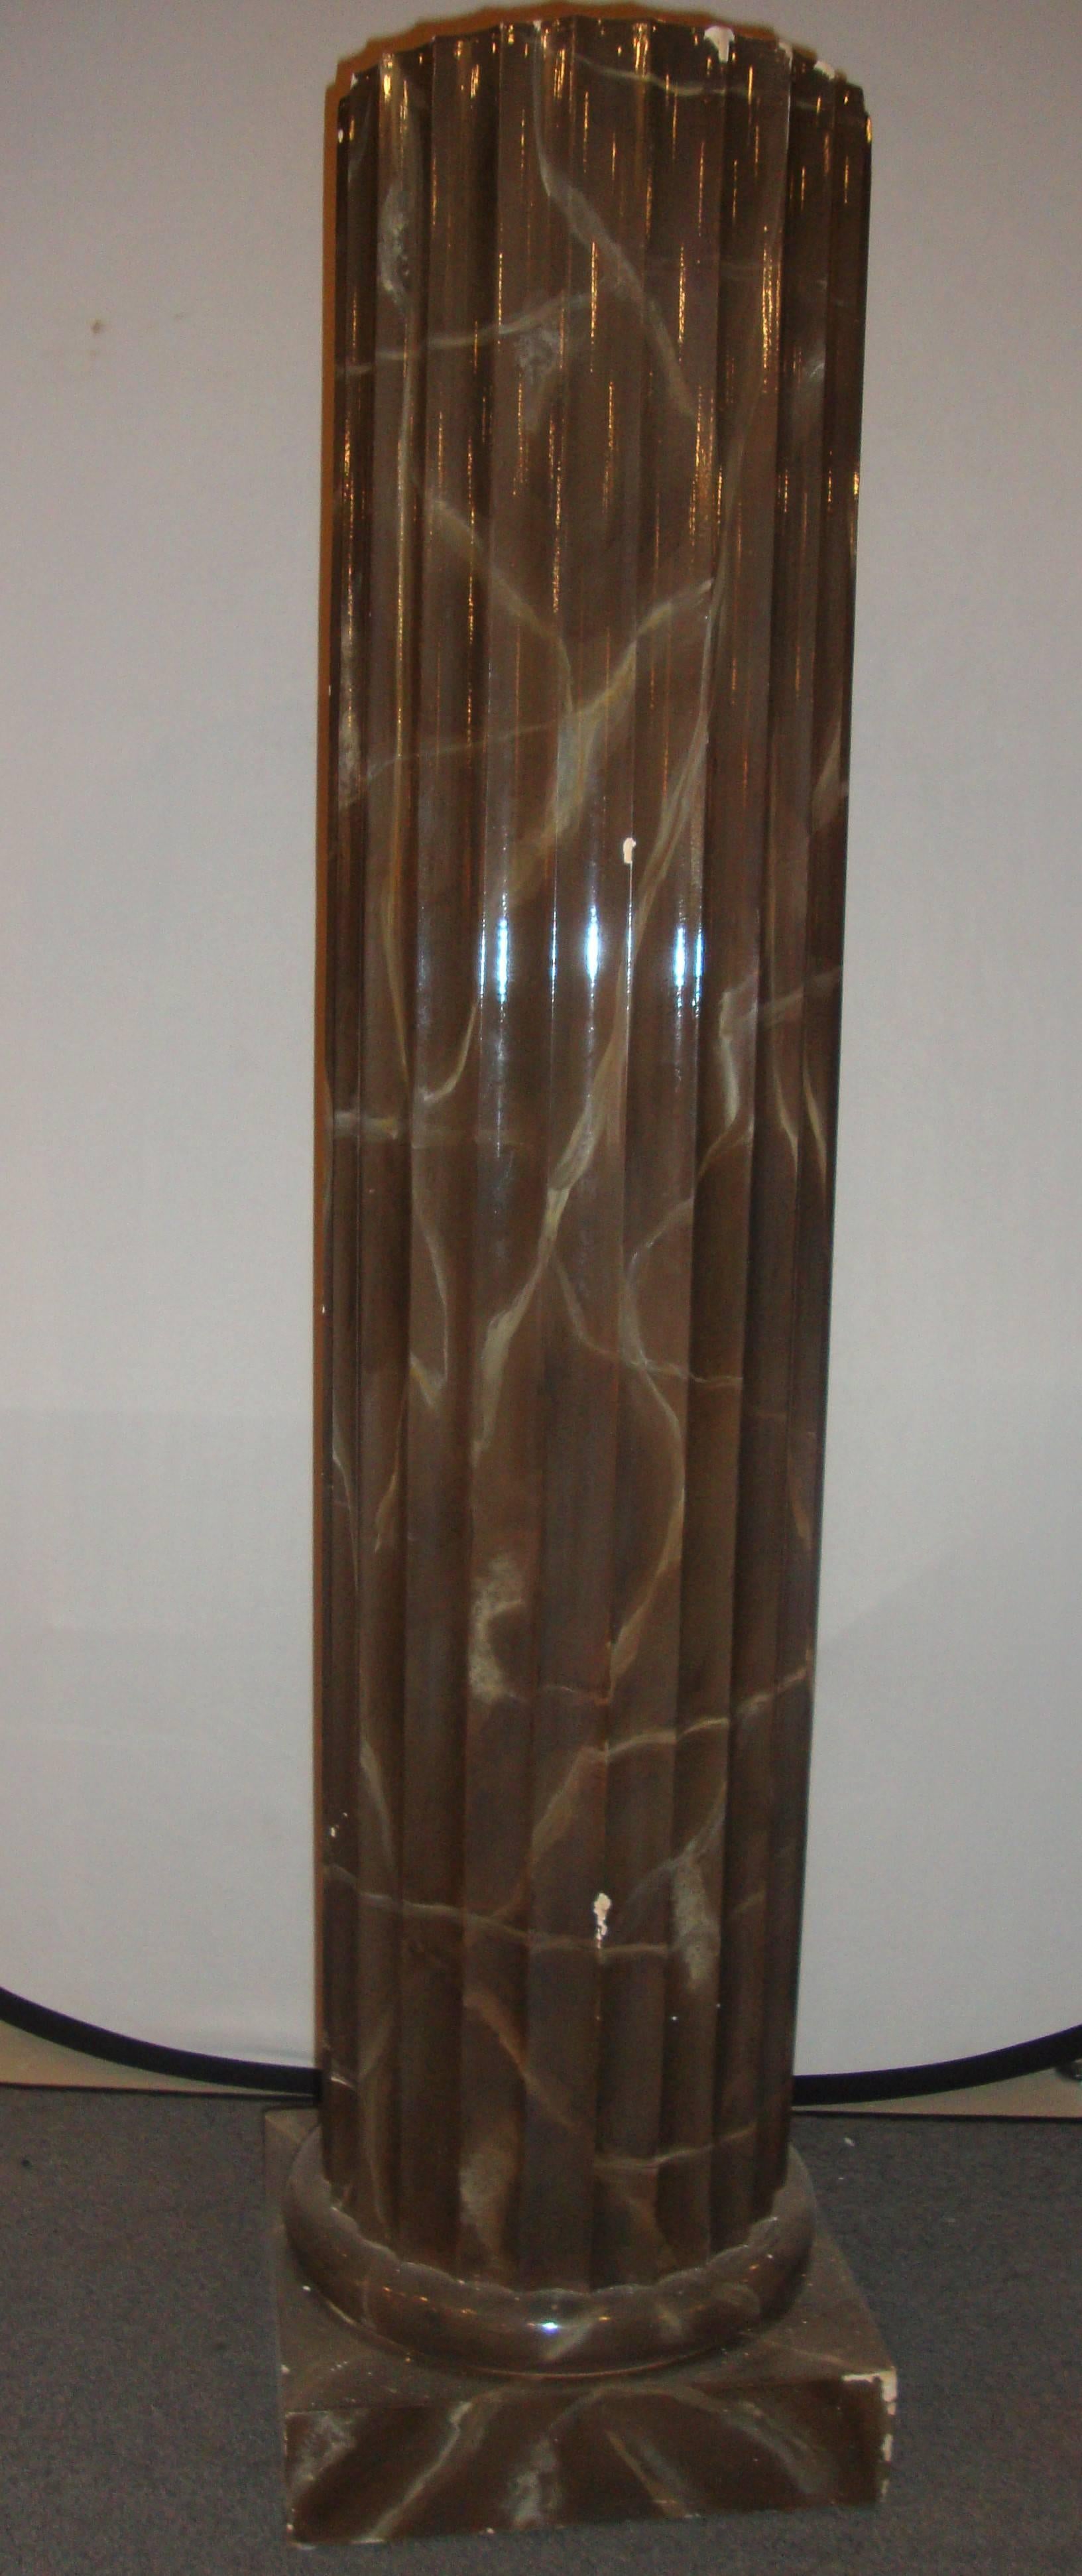 Pair of column style pedestals. The pair of pedestals come in a column style with a brown, marble like appearance.